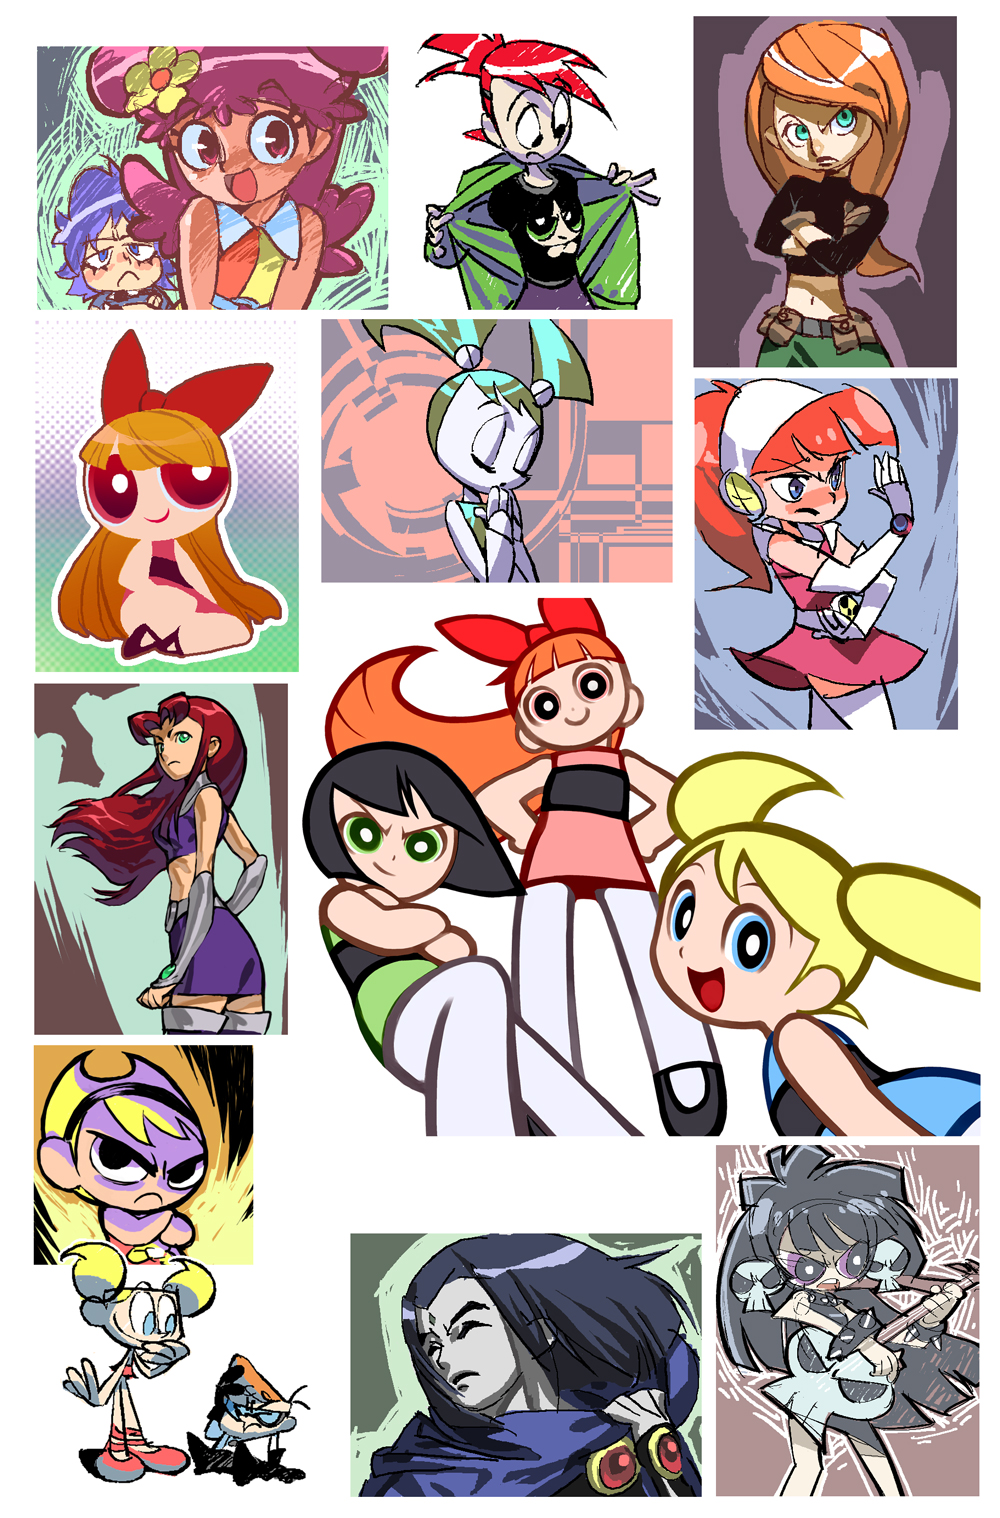 atomic_betty black_eyes black_hair blonde_hair blossom_(ppg) blue_eyes blue_hair breasts bubbles_(ppg) buttercup_(ppg) cartoon_network closed_eyes dc_comics dexter dexter's_laboratory frankie_foster green_eyes guitar highres holding holding_instrument instrument kim_possible long_hair mandy_(grim_adventures) my_life_as_a_teenage_robot otonari_koubou powerpuff_girls purple_hair raven_(dc) red_hair short_hair skirt small_breasts starfire teen_titans the_grim_adventures_of_billy_&amp;_mandy toon_(style) yoshinari_you younger